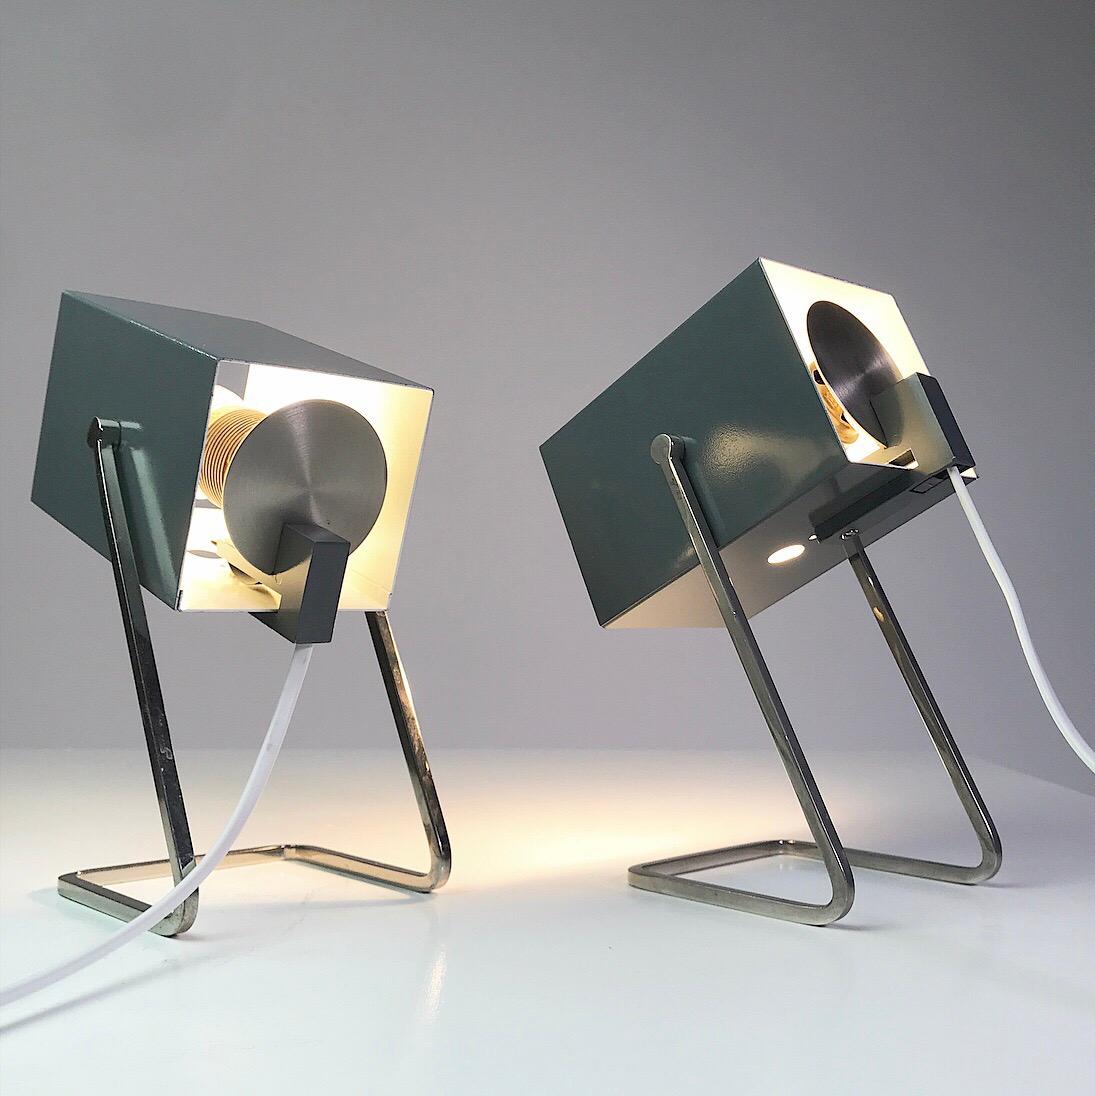 Beautiful set of well built table lamps by Kaiser Leuchten, Germany, 1960s.

Cube is the nickname of this minimalistic set of lamps. The cube shaped shade can be tilted up and down but not sideways.

Chrome base holders combined with grey and white